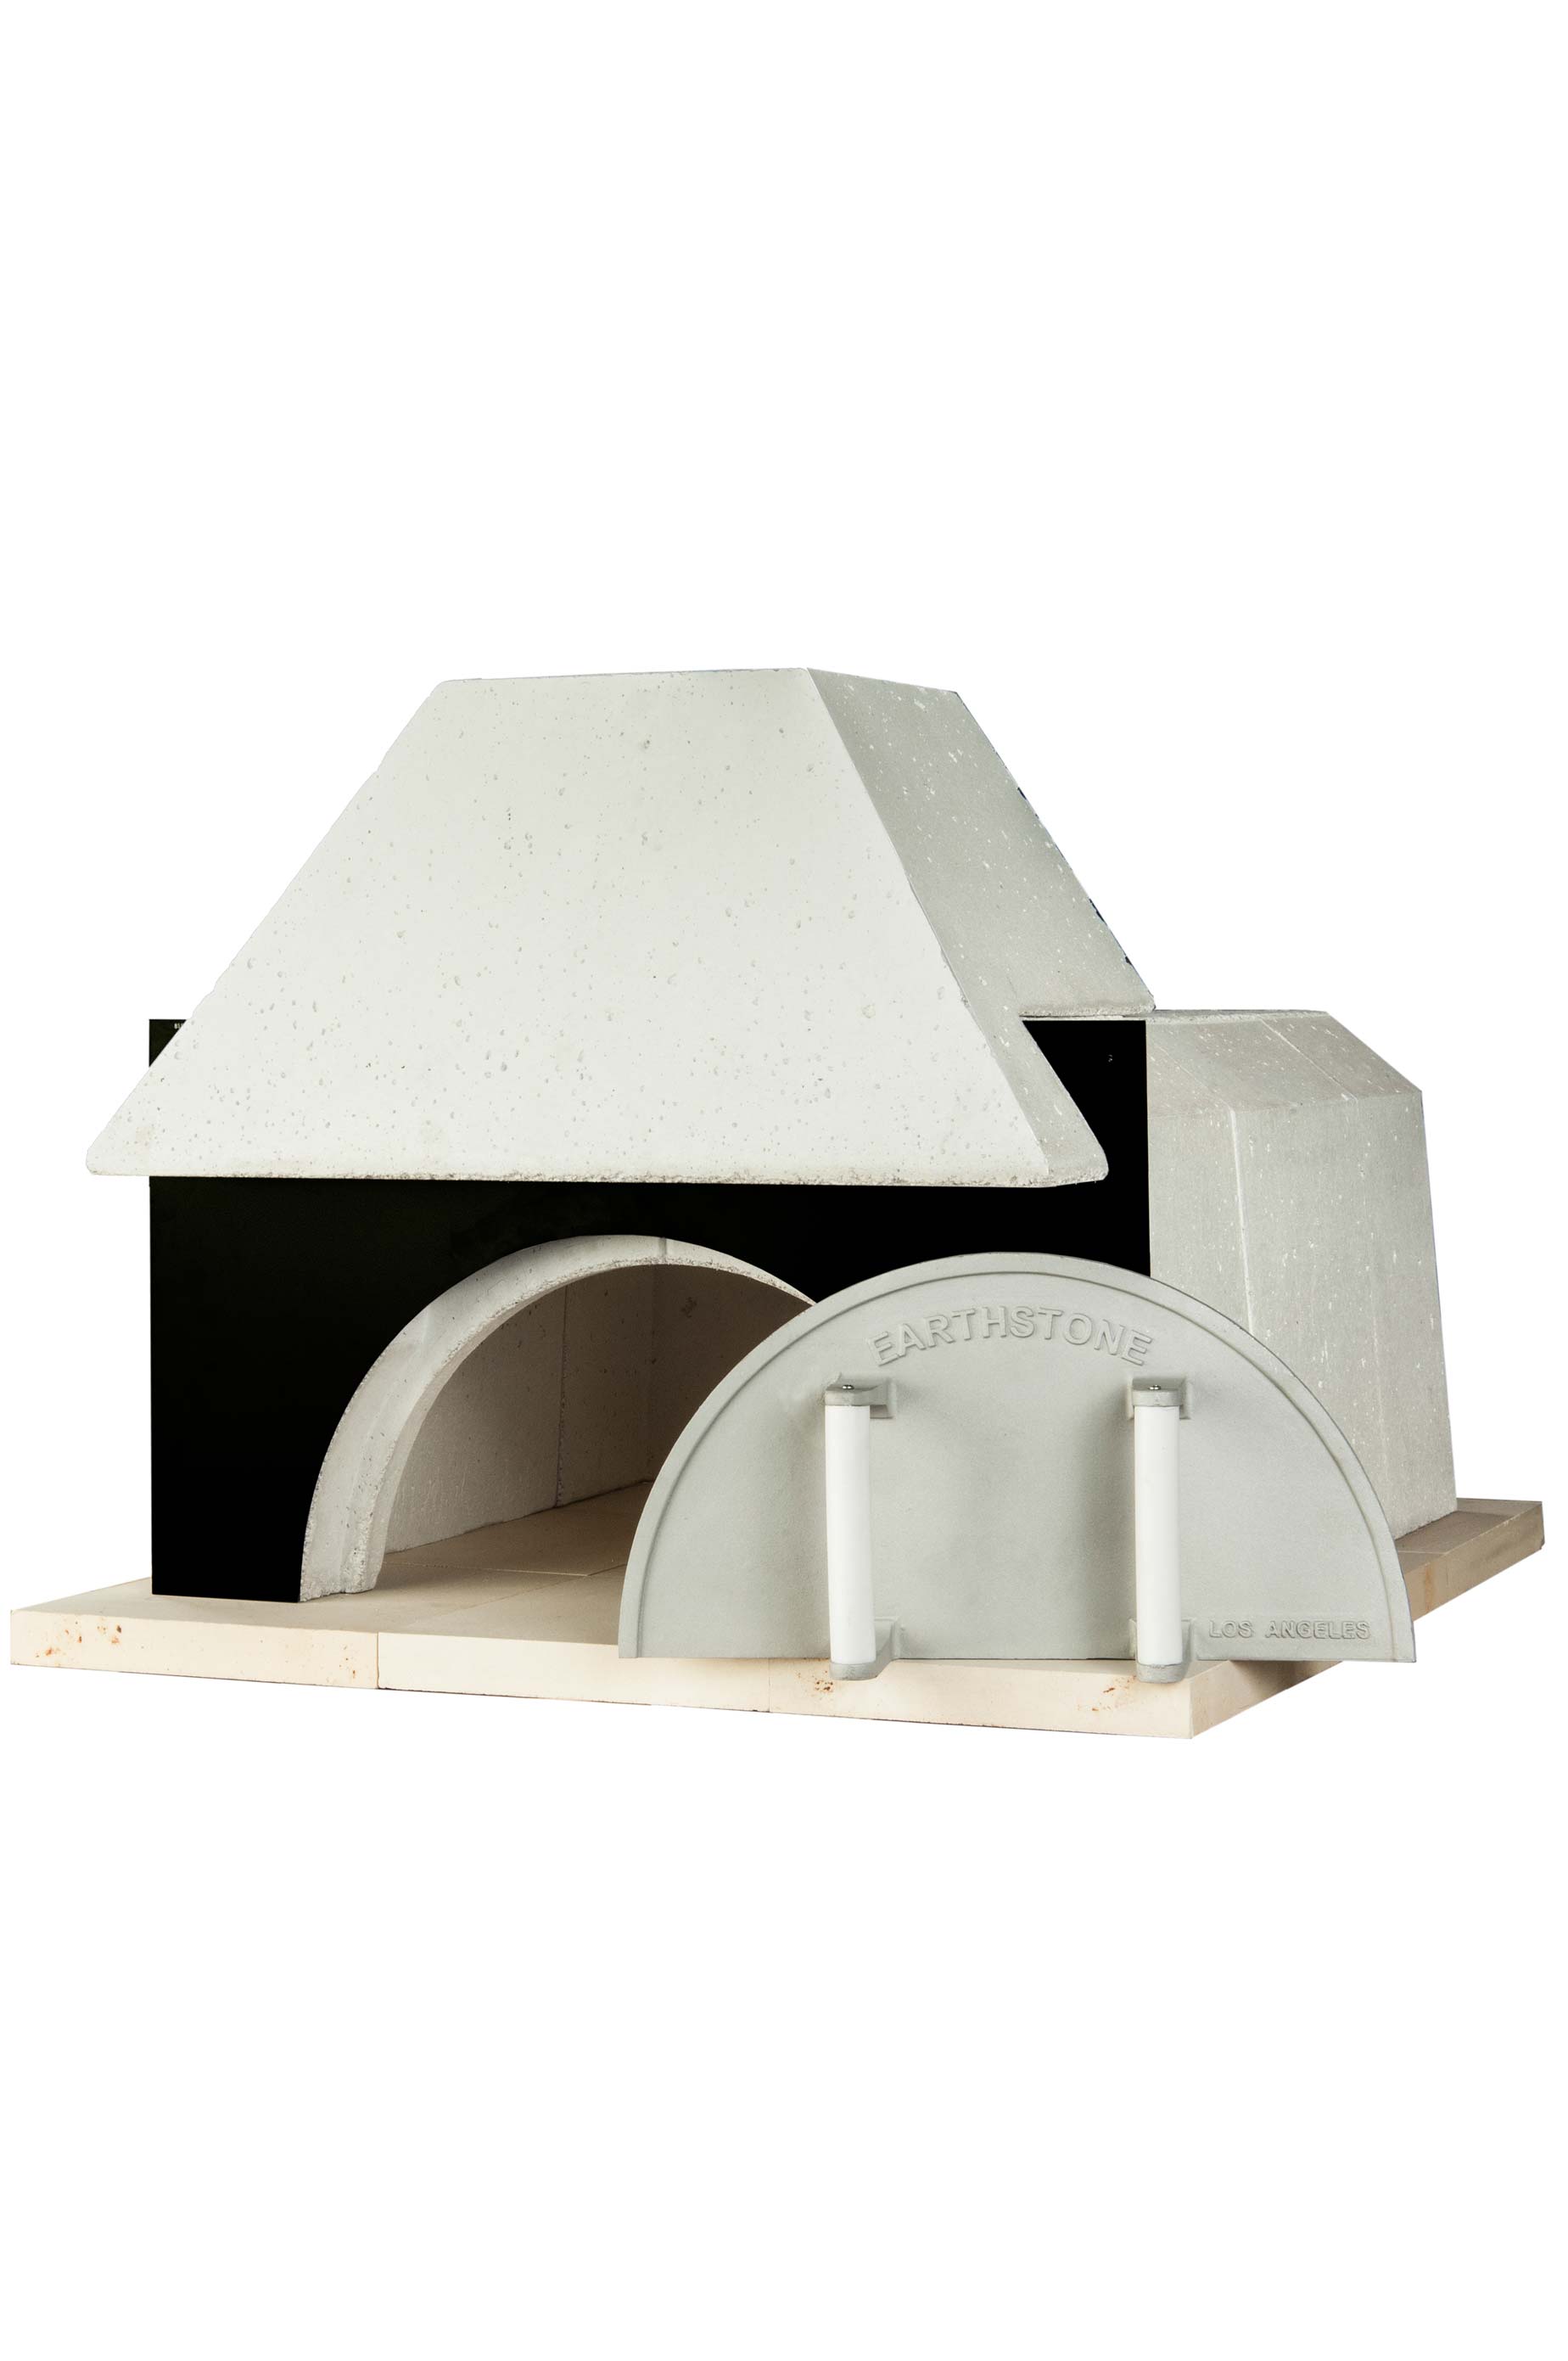 Outdoor Pizza Oven Kits